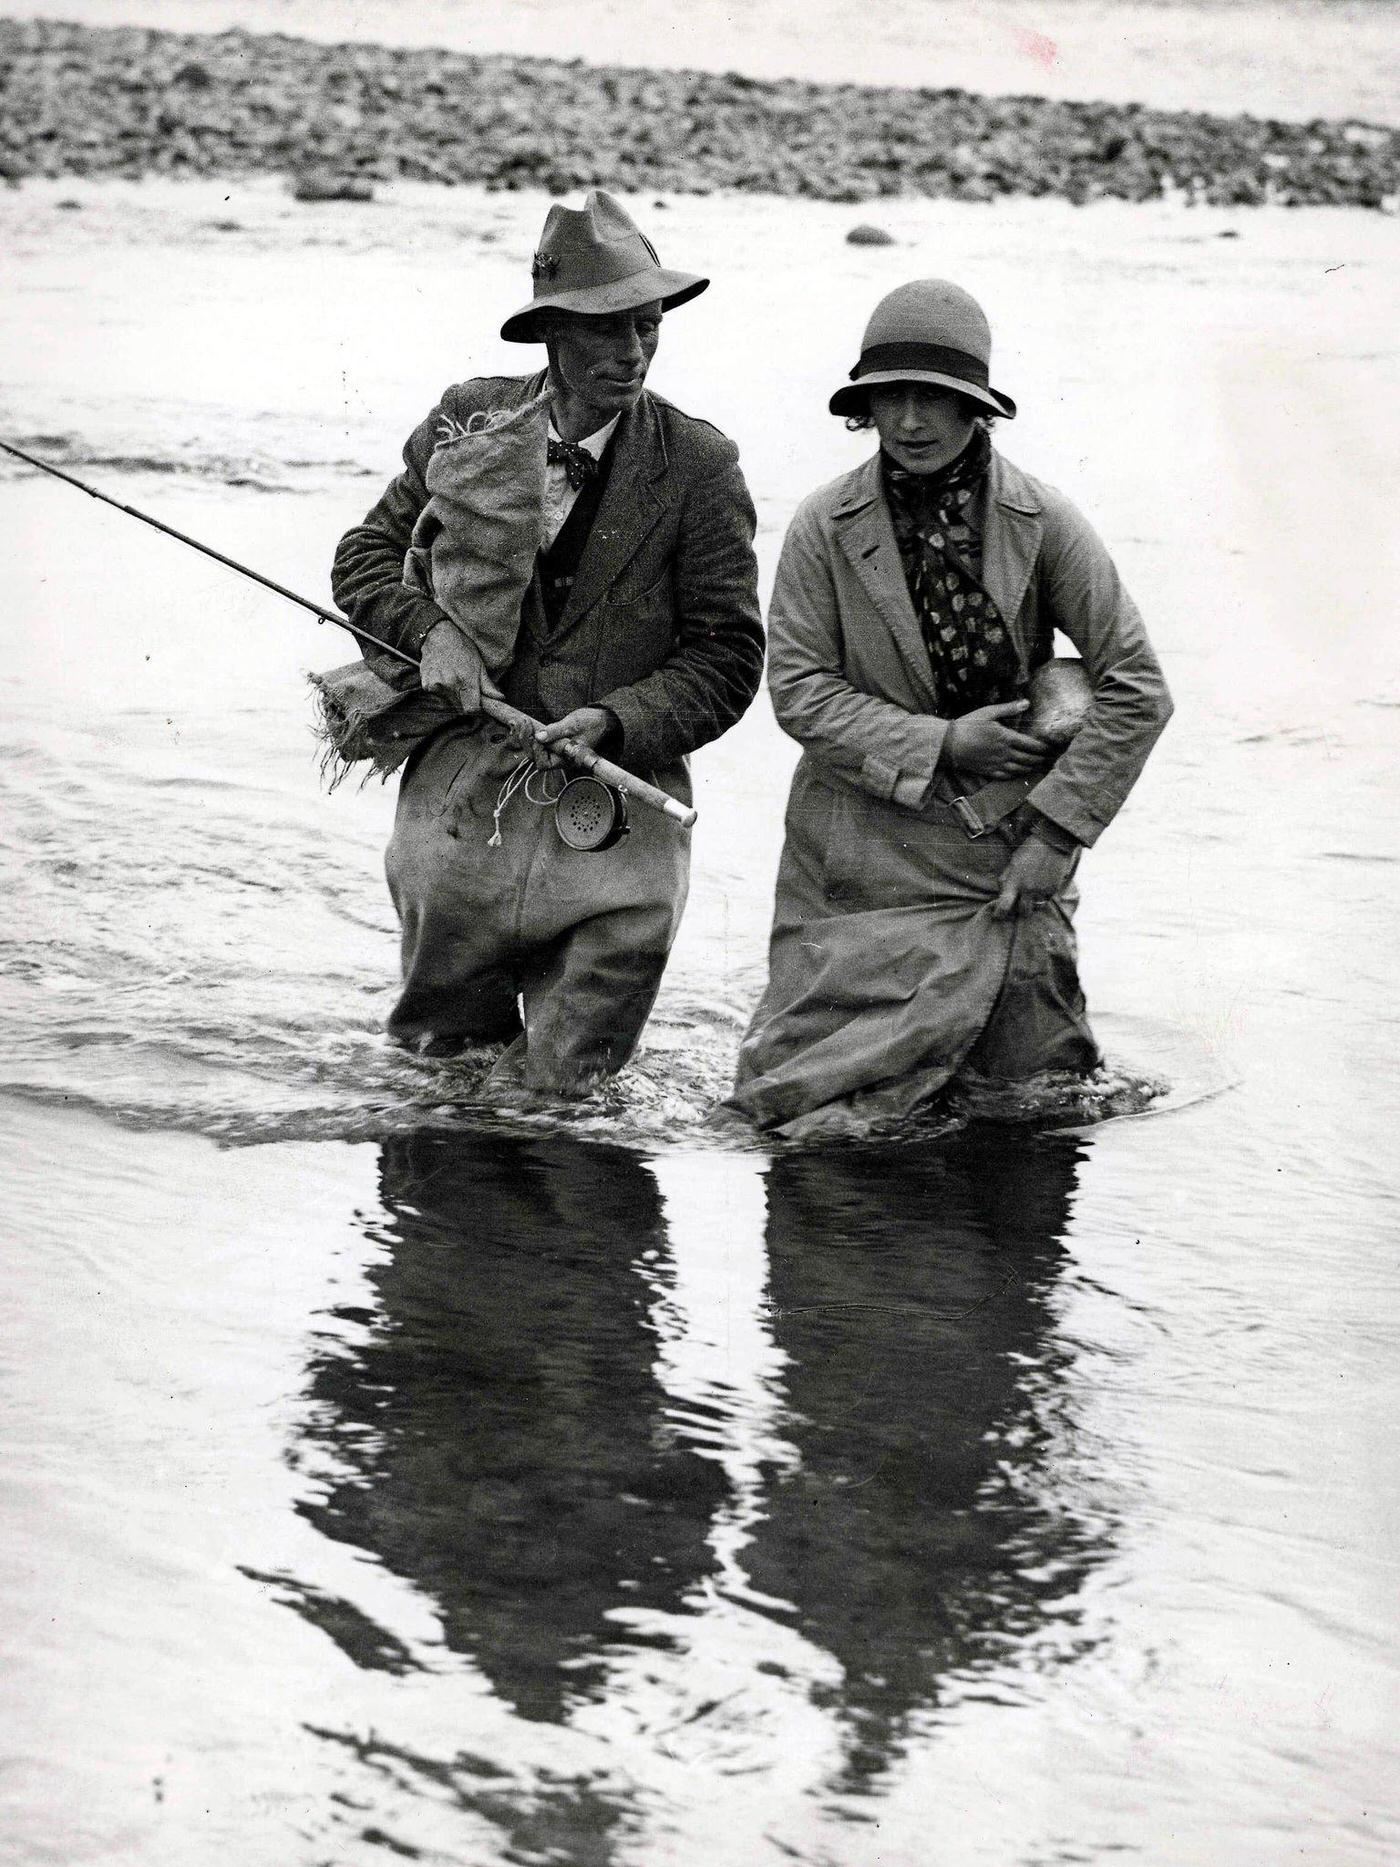 The Queen Mother fishing for trout during a fishing expedition at Tokaanu, New Zealand.